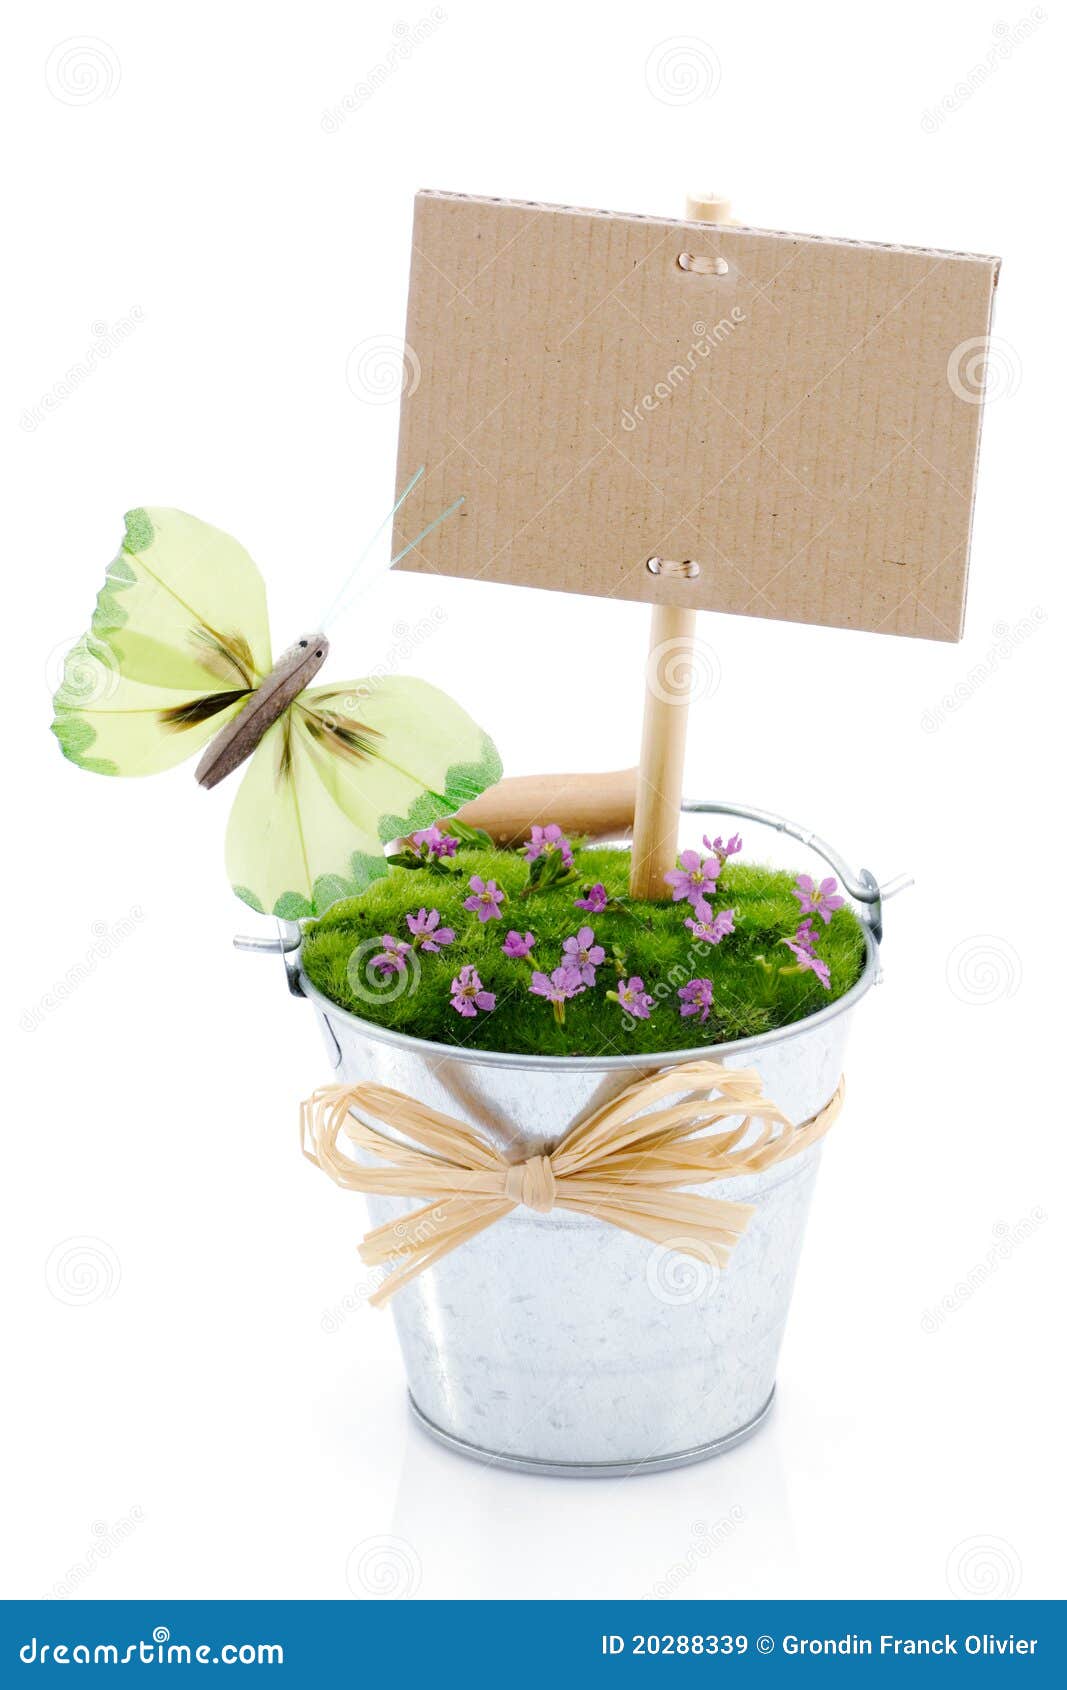 Decorative flower with sign. Decorative flower in plant pot with butterfly and blank sign; isolated on white background.